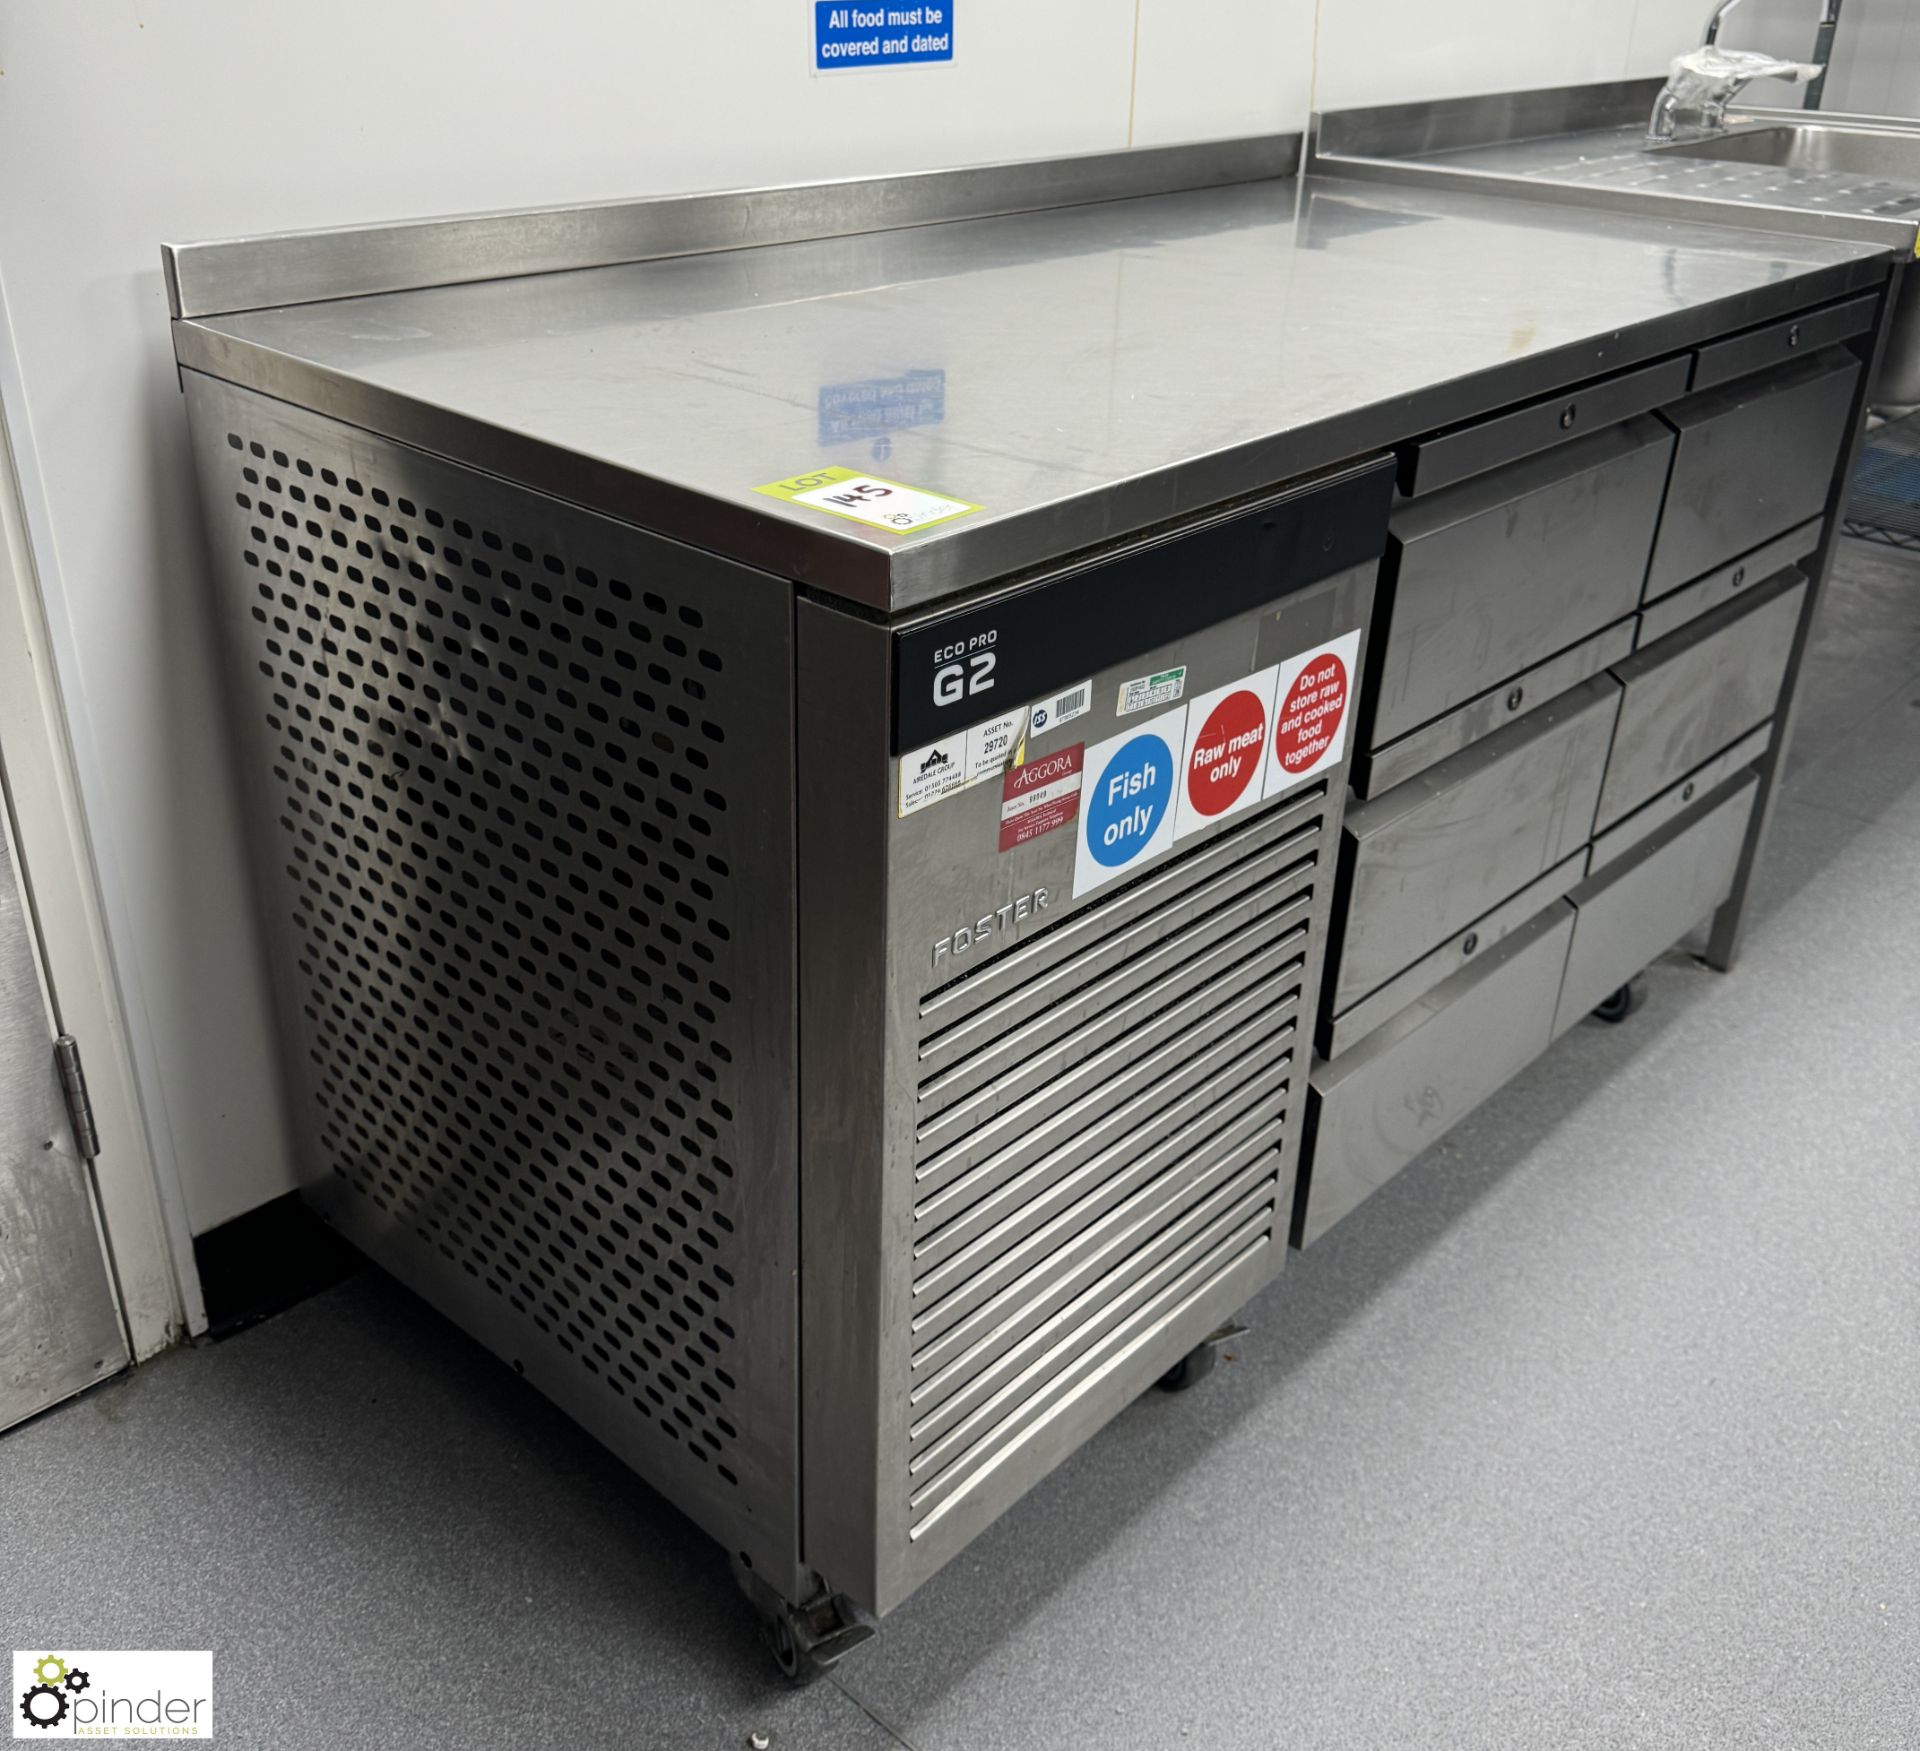 Foster Eco Pro G2 stainless steel mobile 6-drawer Chilled Counter, 240volts, 1400mm x 700mm x - Image 5 of 6